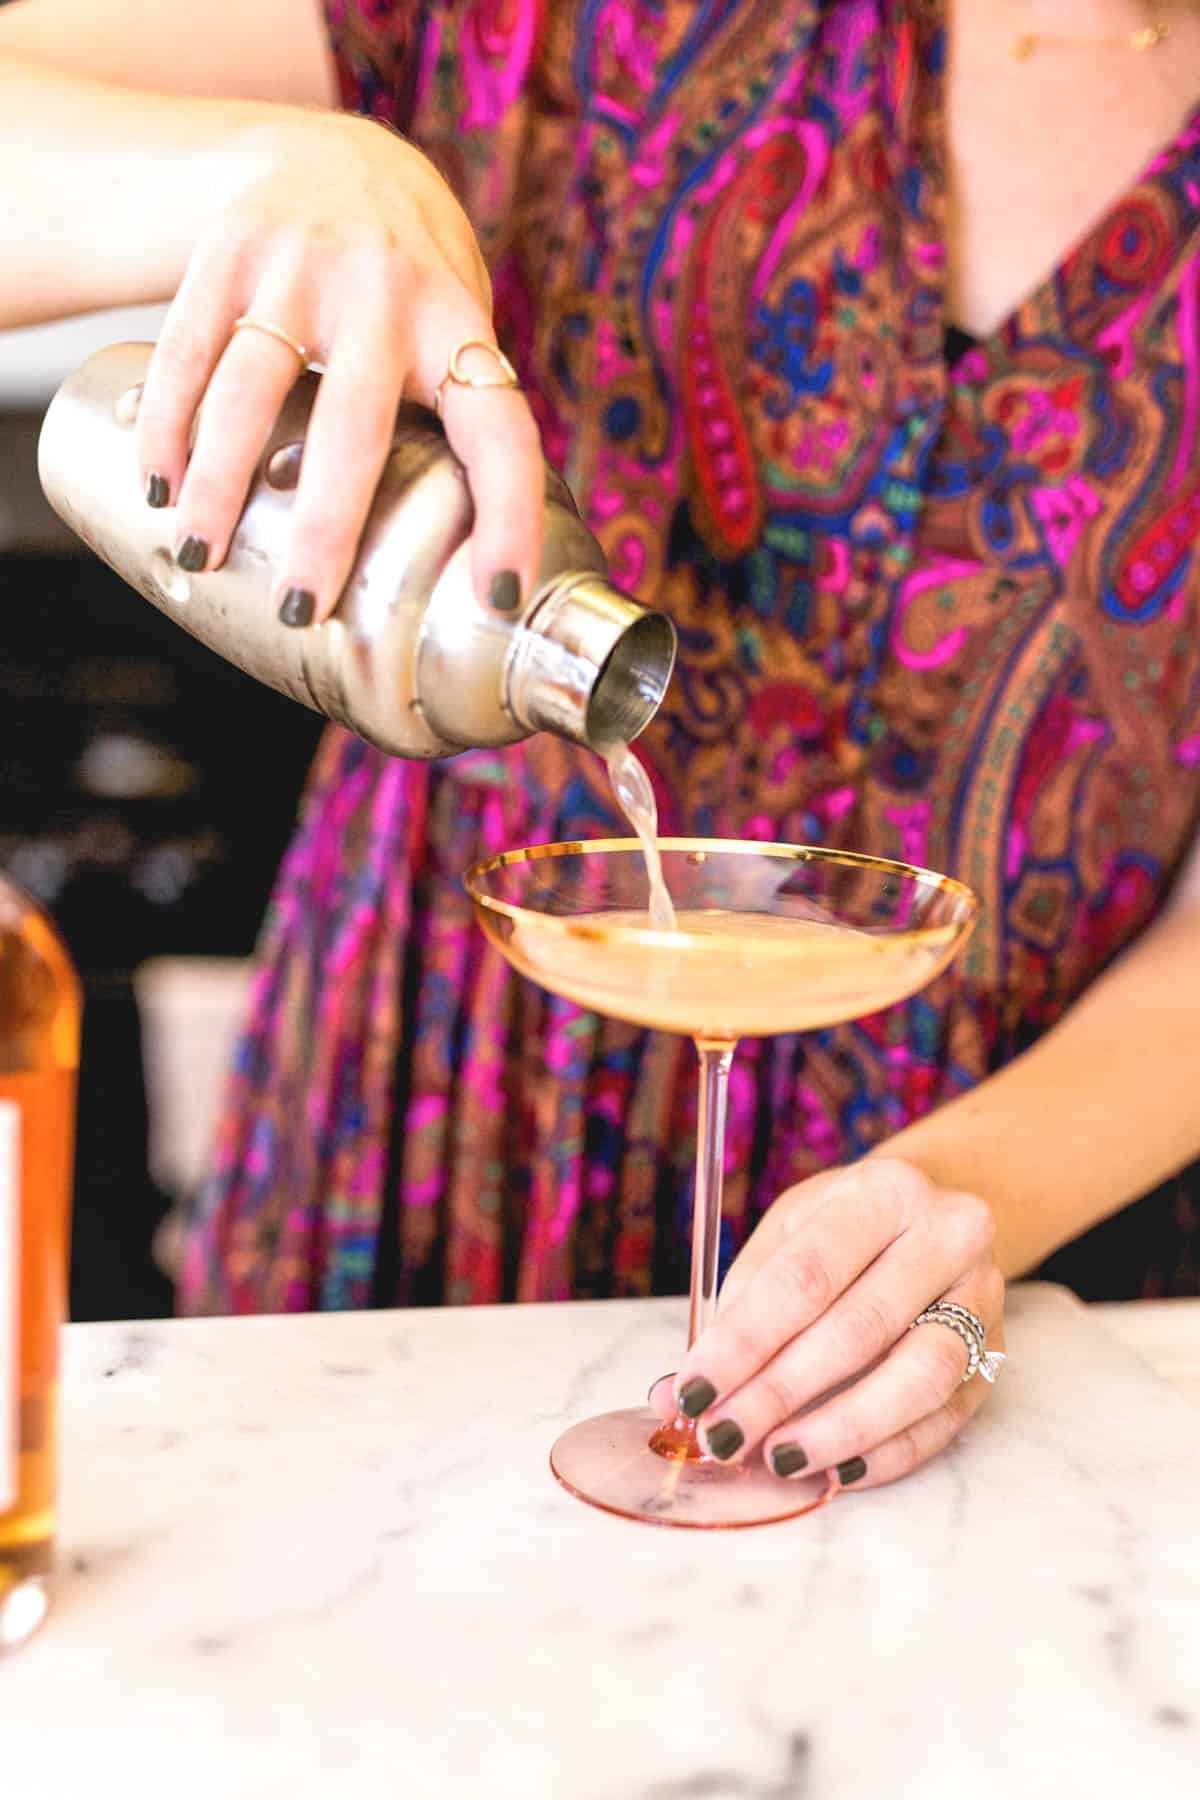 Woman pouring a cocktail into a martini glass.